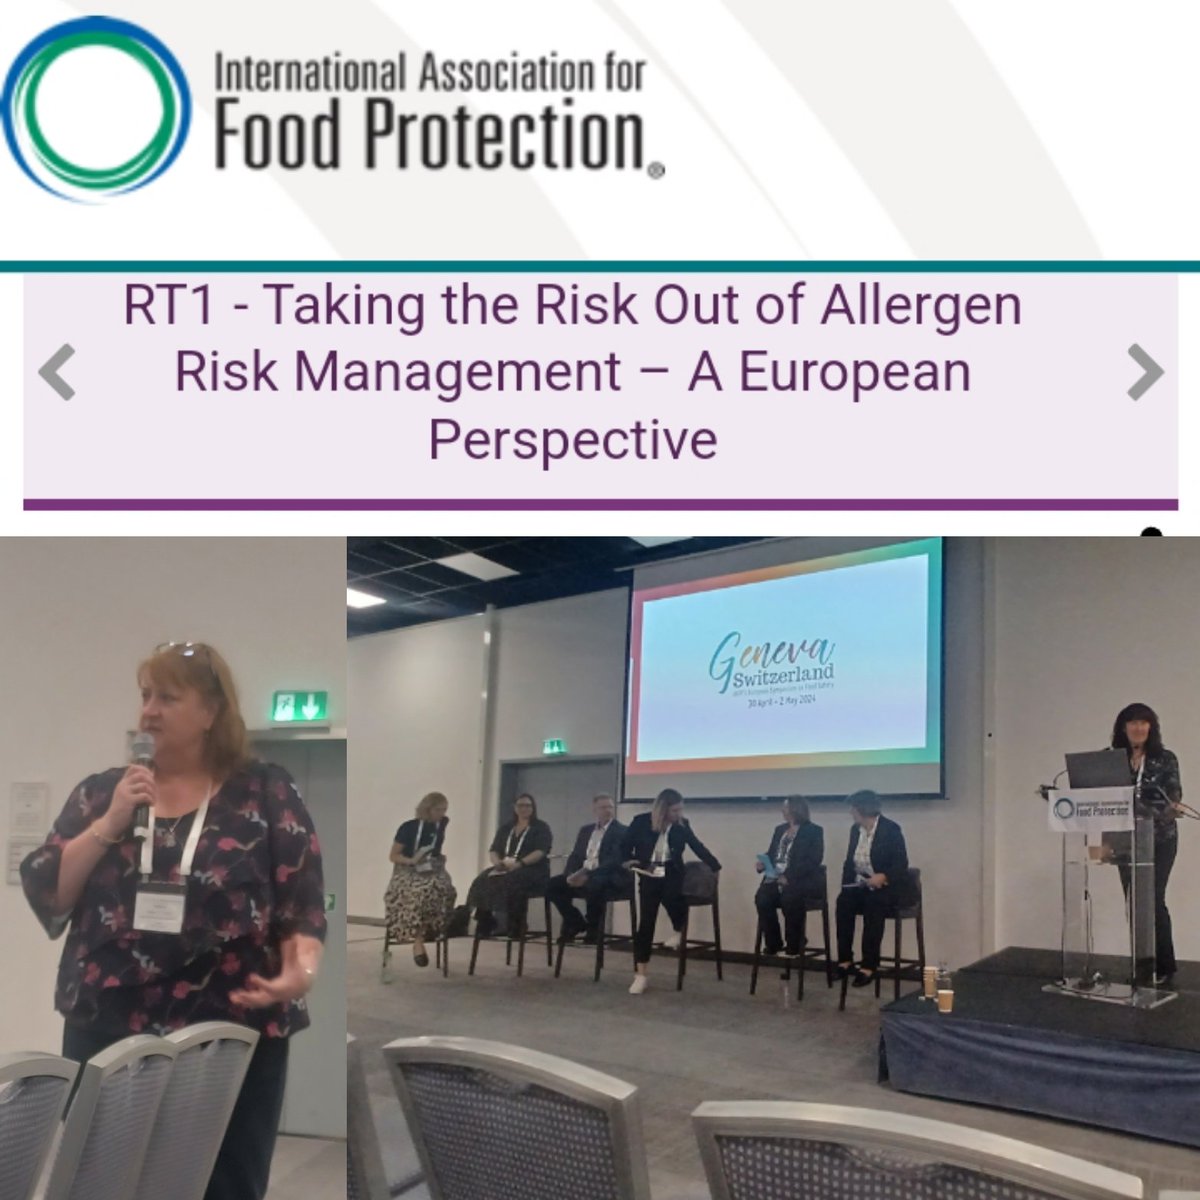 The final session of the first day at the EU Symposium #IAFP2024 @IAFPFood was a roundtable discussion organised and convened by Deb Smith regarding allergen risk management in food manufacturing, with the Welsh SME perspective shared with delegates by @HelenRTaylor2 @ZERO2FIVE_